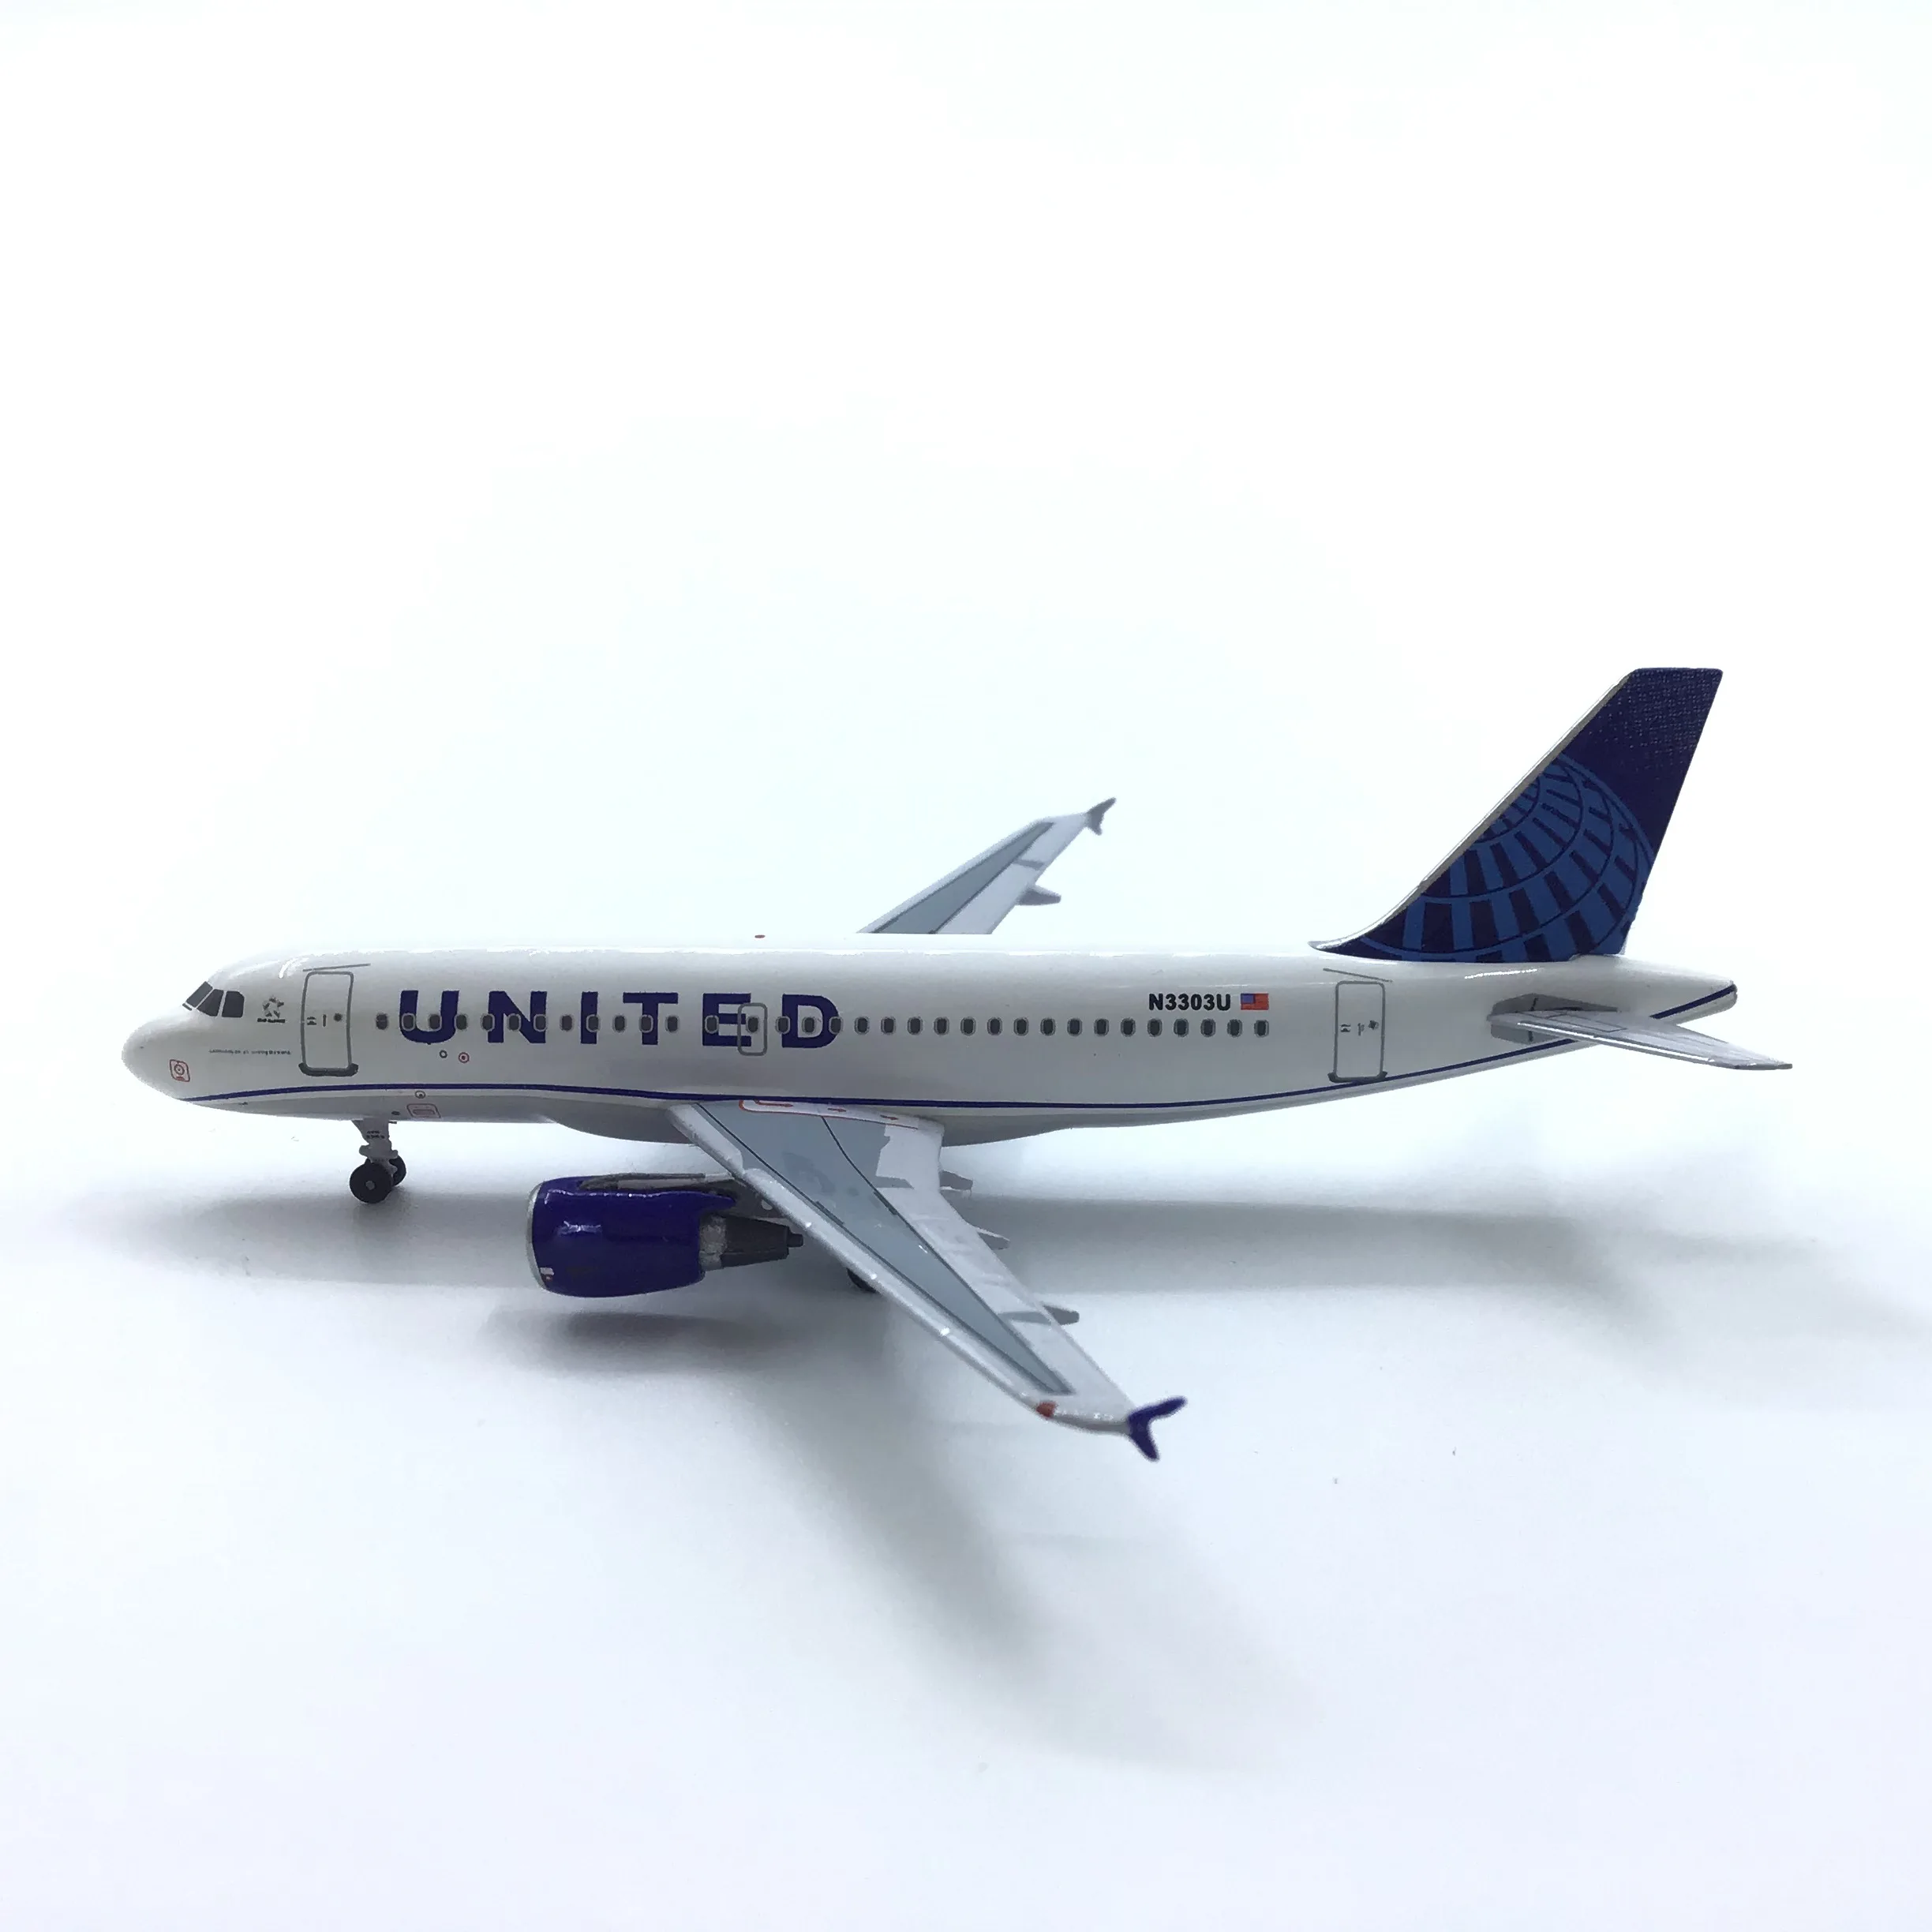 Customized 1:400 Scale Airbus A319 Collectible Airplane Models New Color  N3303u For United - Buy United Airplanes Models,United Model,A319 Model  Product on Alibaba.com